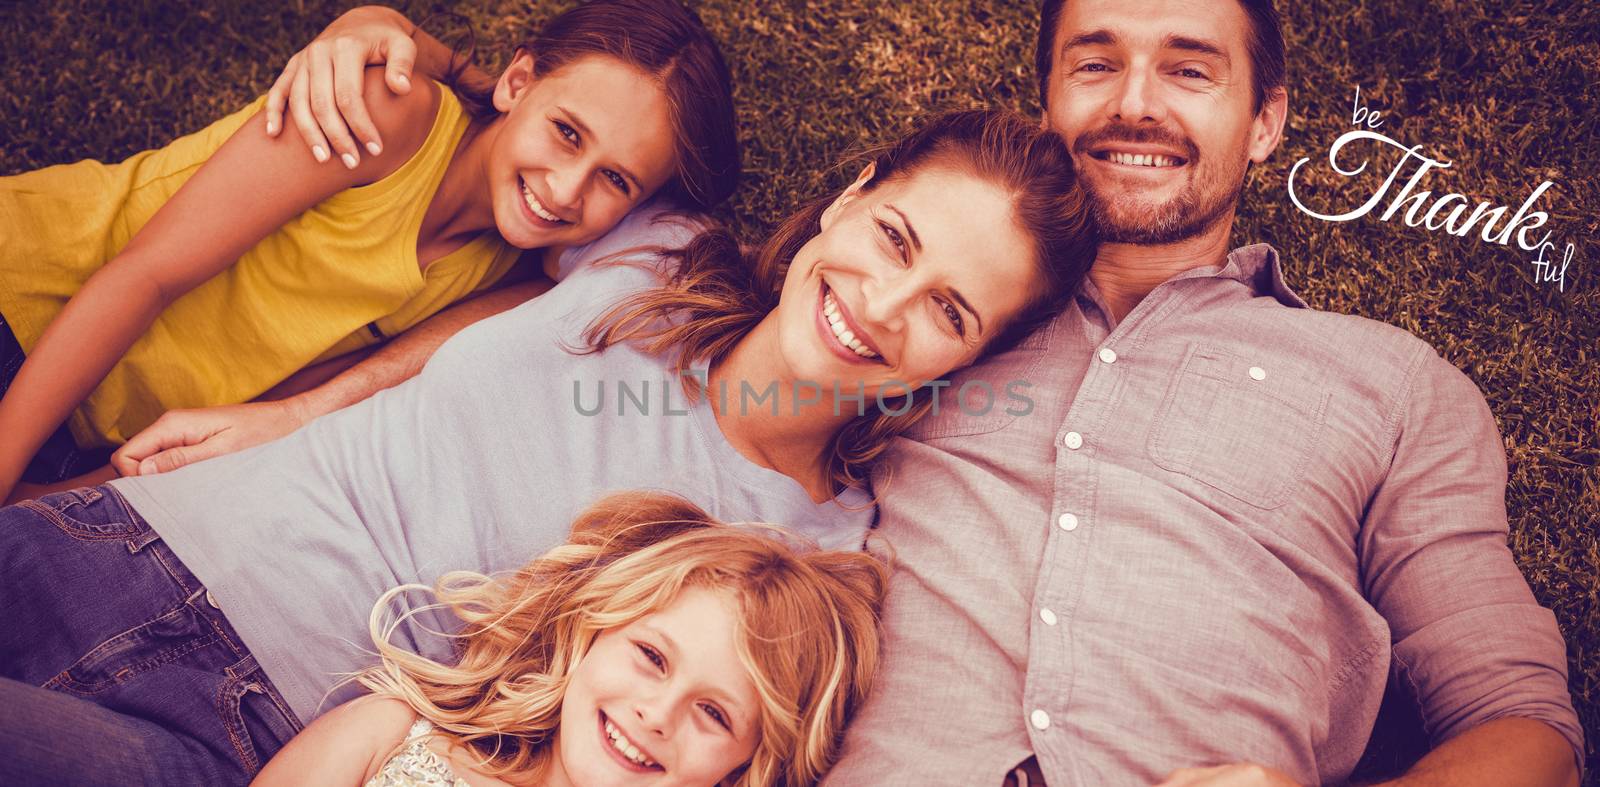 Digital image of happy thanksgiving day text greeting against portrait of happy family lying on field